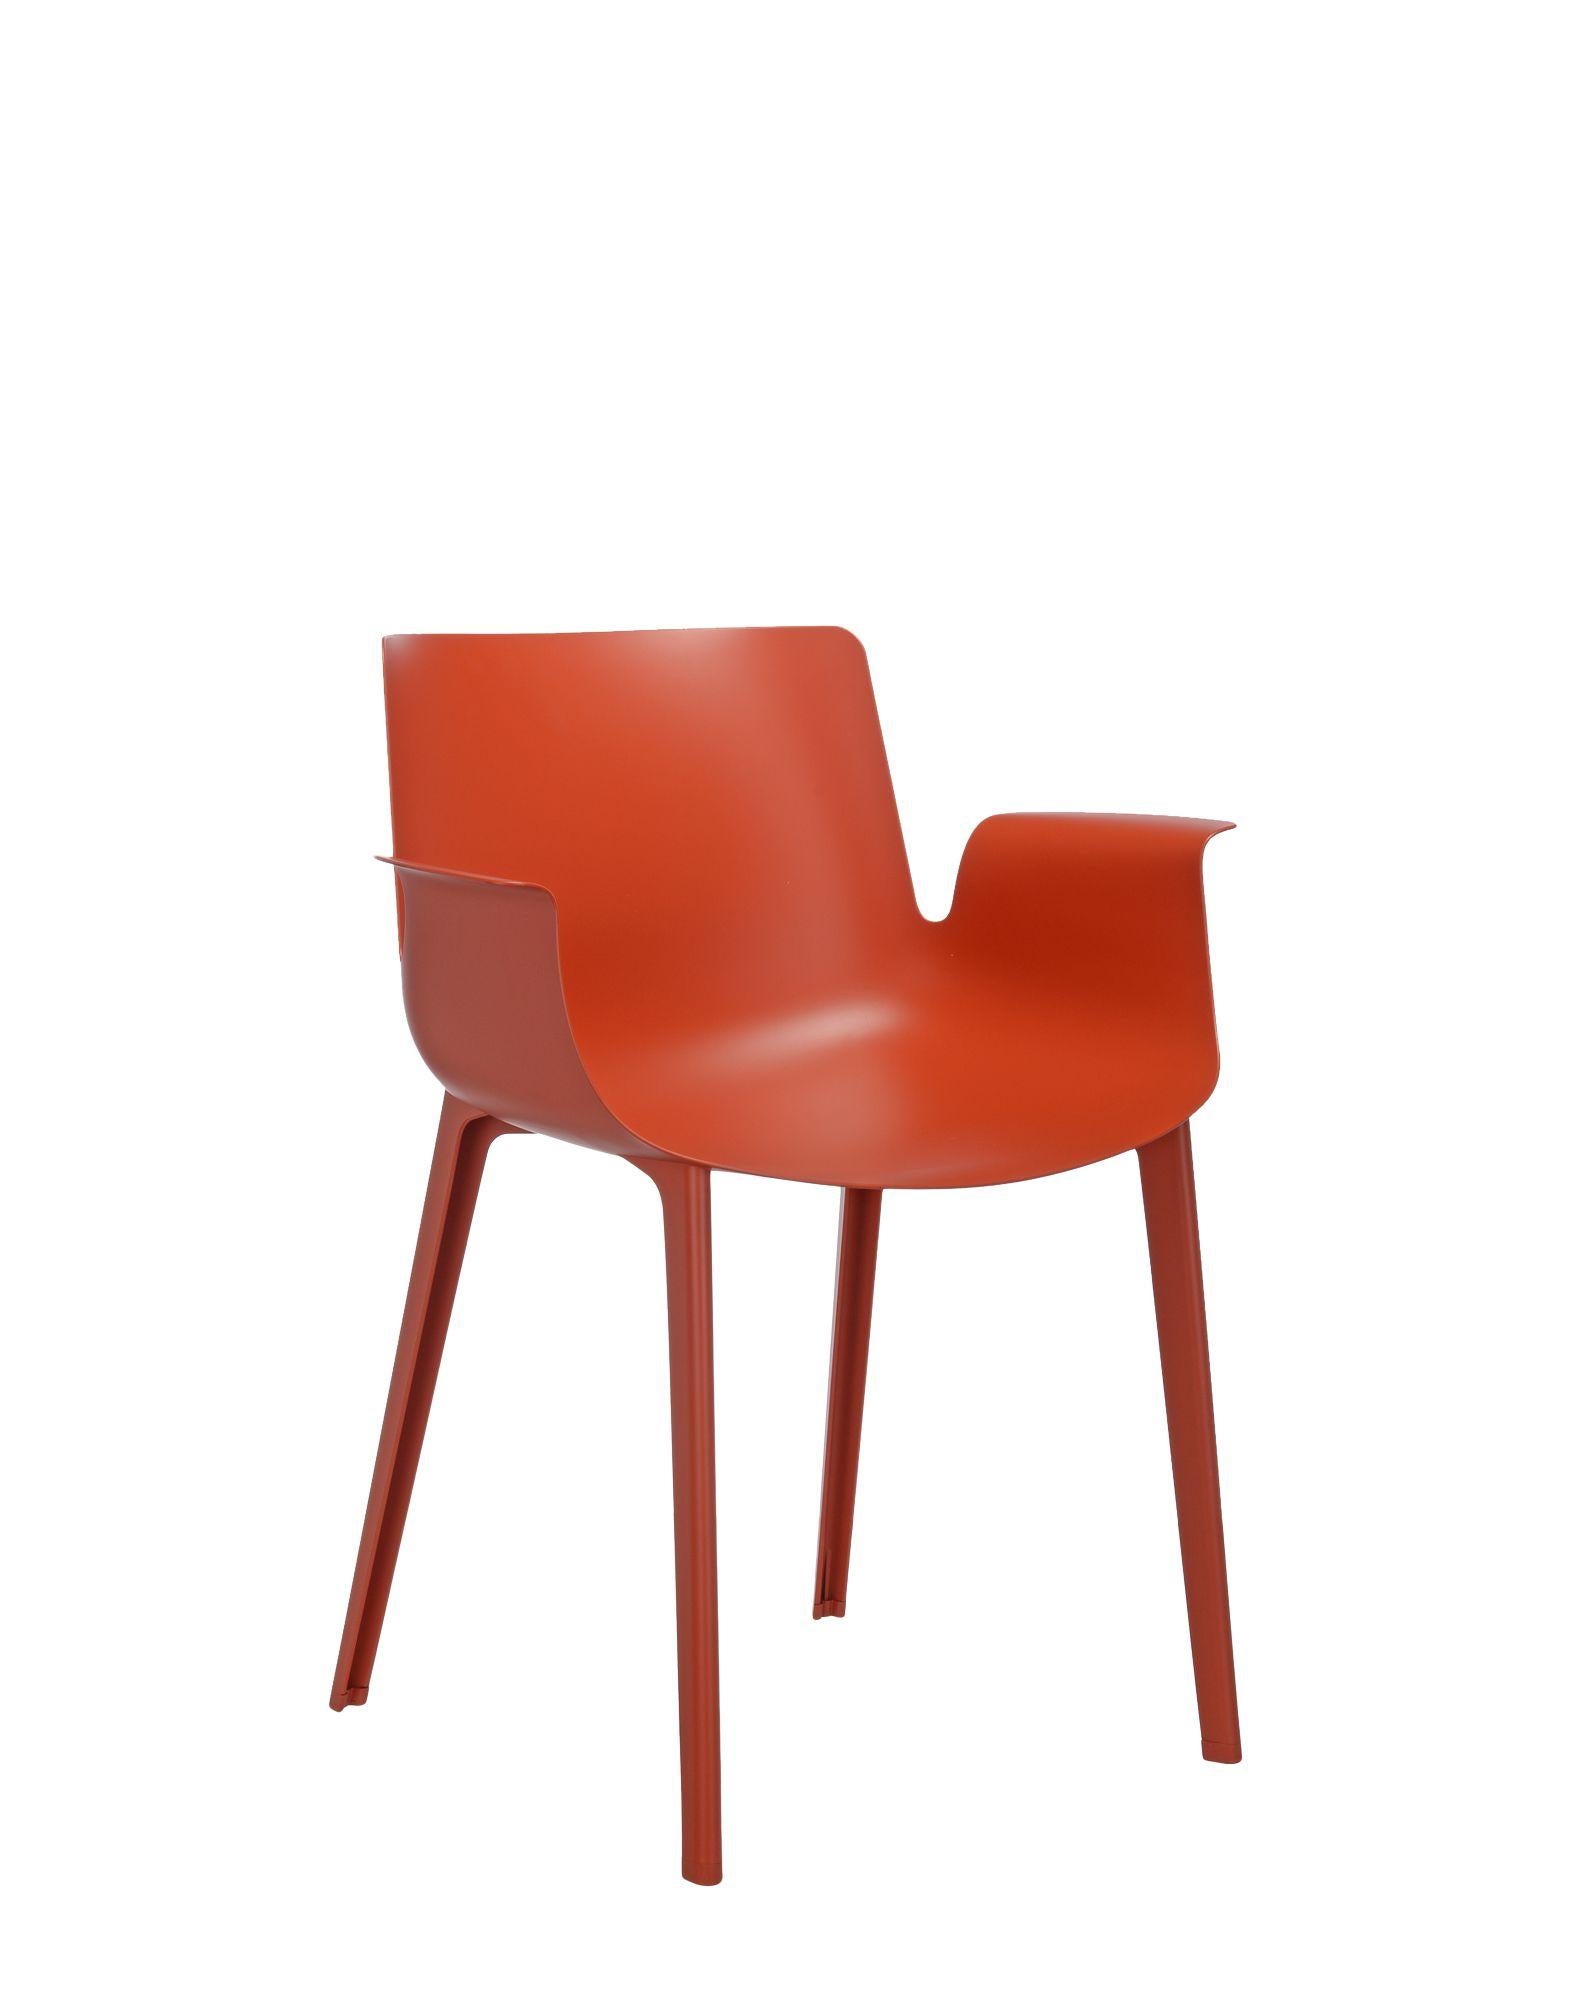 2016 saw the completion of the “Piuma” project by Piero Lissoni. The chair is one of the most revolutionary and enterprising products in Kartell’s repertoire of technology and materials. By applying its injection molding techniques in a